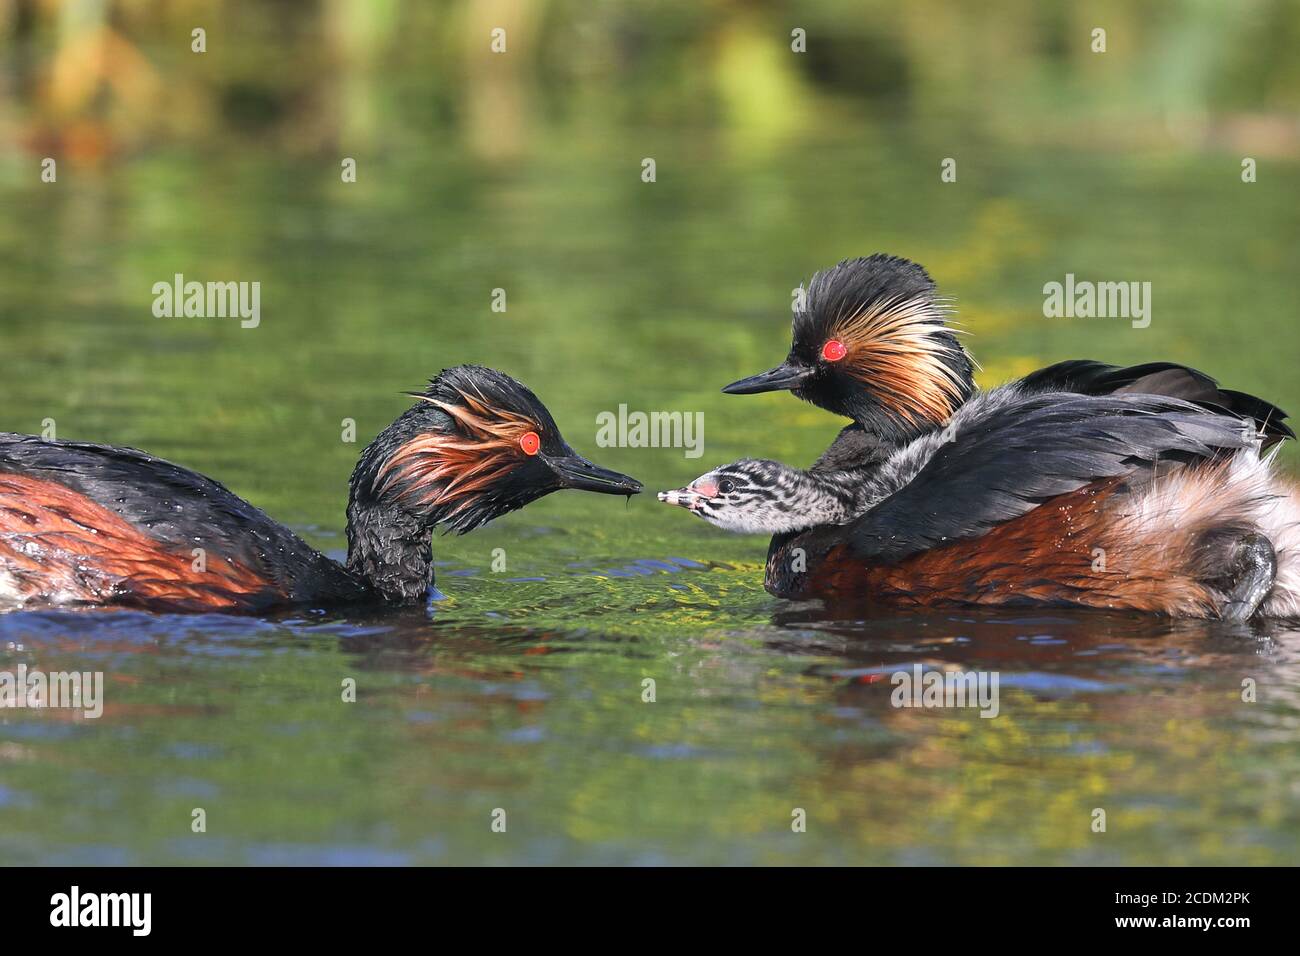 black-necked grebe (Podiceps nigricollis), swimming pair with chick, chick is fed, Netherlands, Groningen Stock Photo